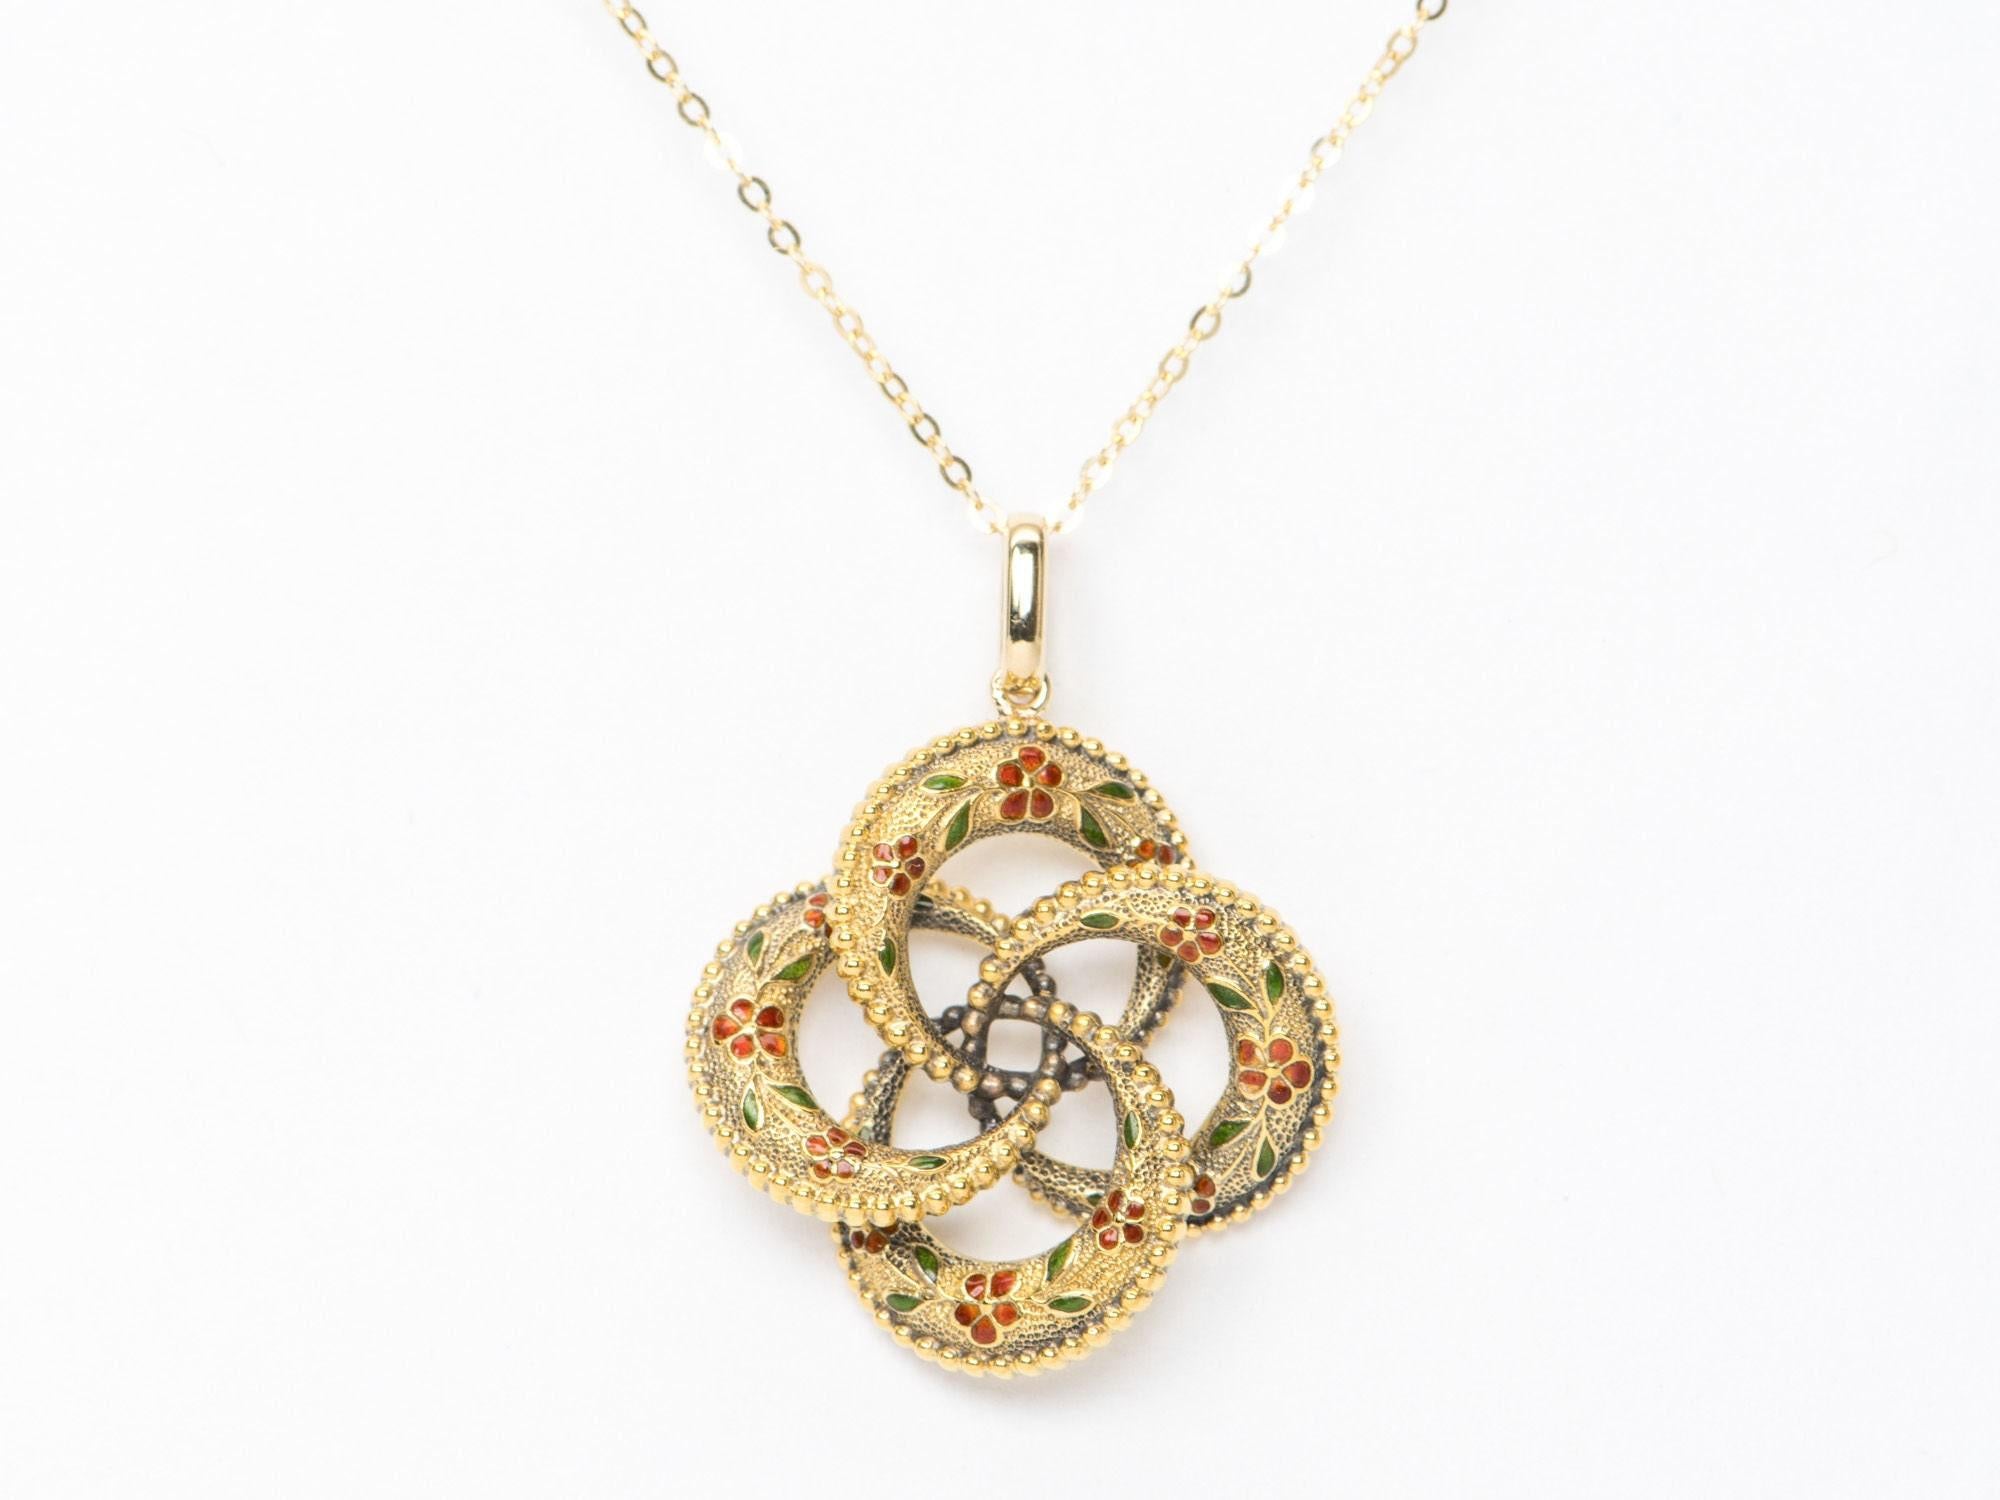 

♥ 14K Yellow Gold Art Nouveau Vintage Red Green Enamel Pin Converted to Pendant
♥ Solid 14k yellow gold pendant set with a beautiful -shaped
♥ Gorgeous color!
♥ The item measures 27.2 mm in length, 24.7 mm in width, and stands 5.3 mm thick

♥